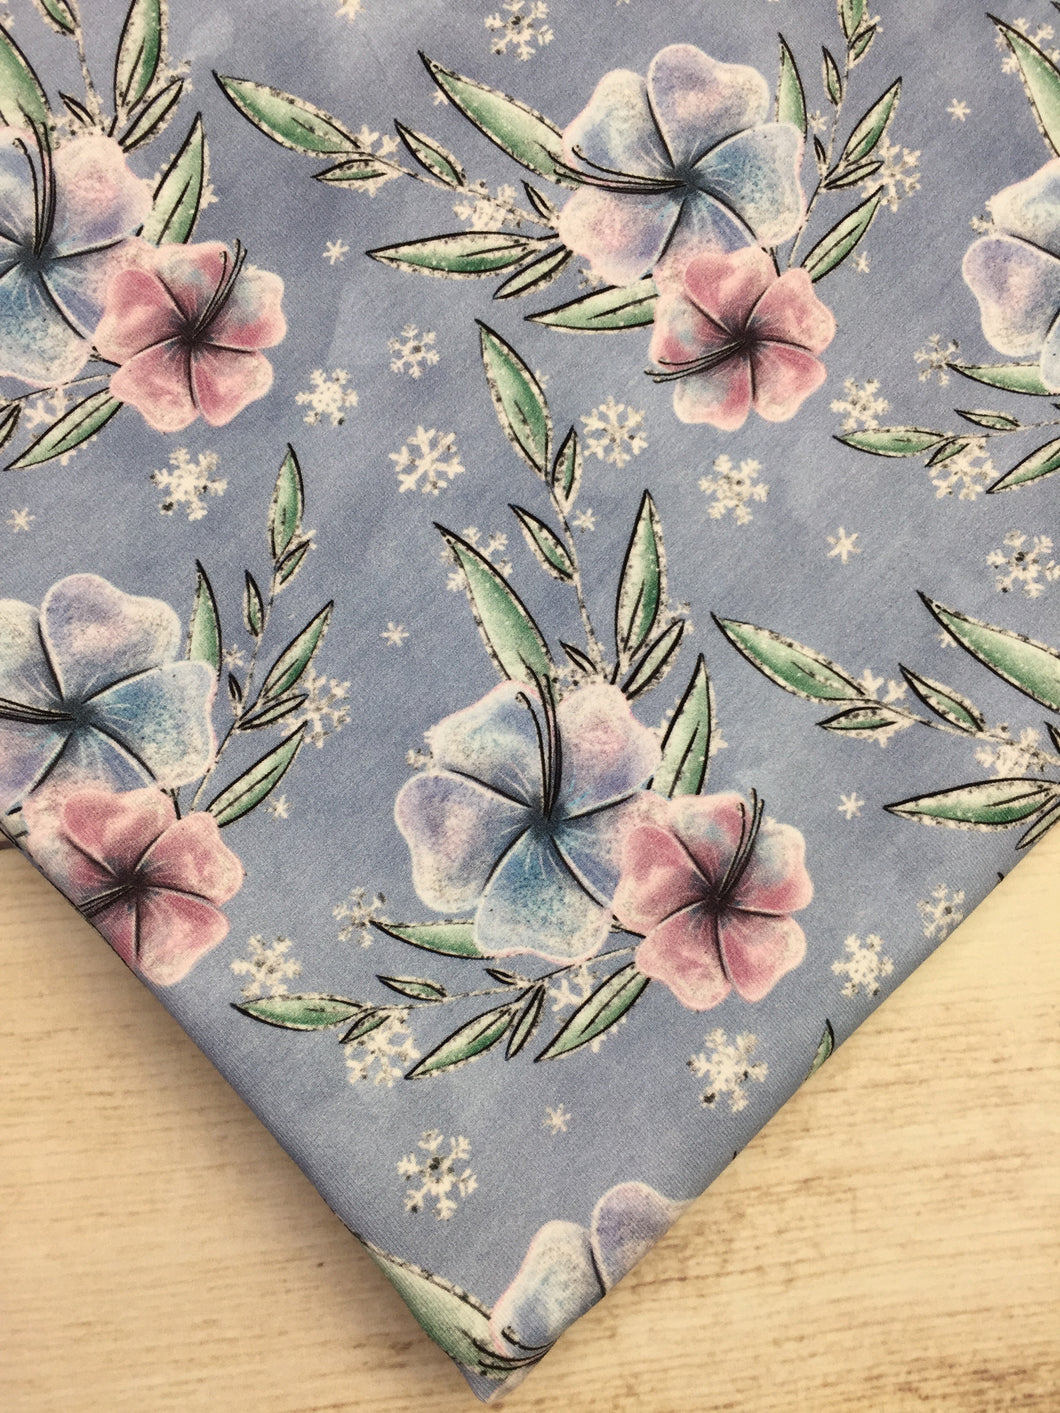 Clearance Cotton Spandex Periwinkle Winter Floral